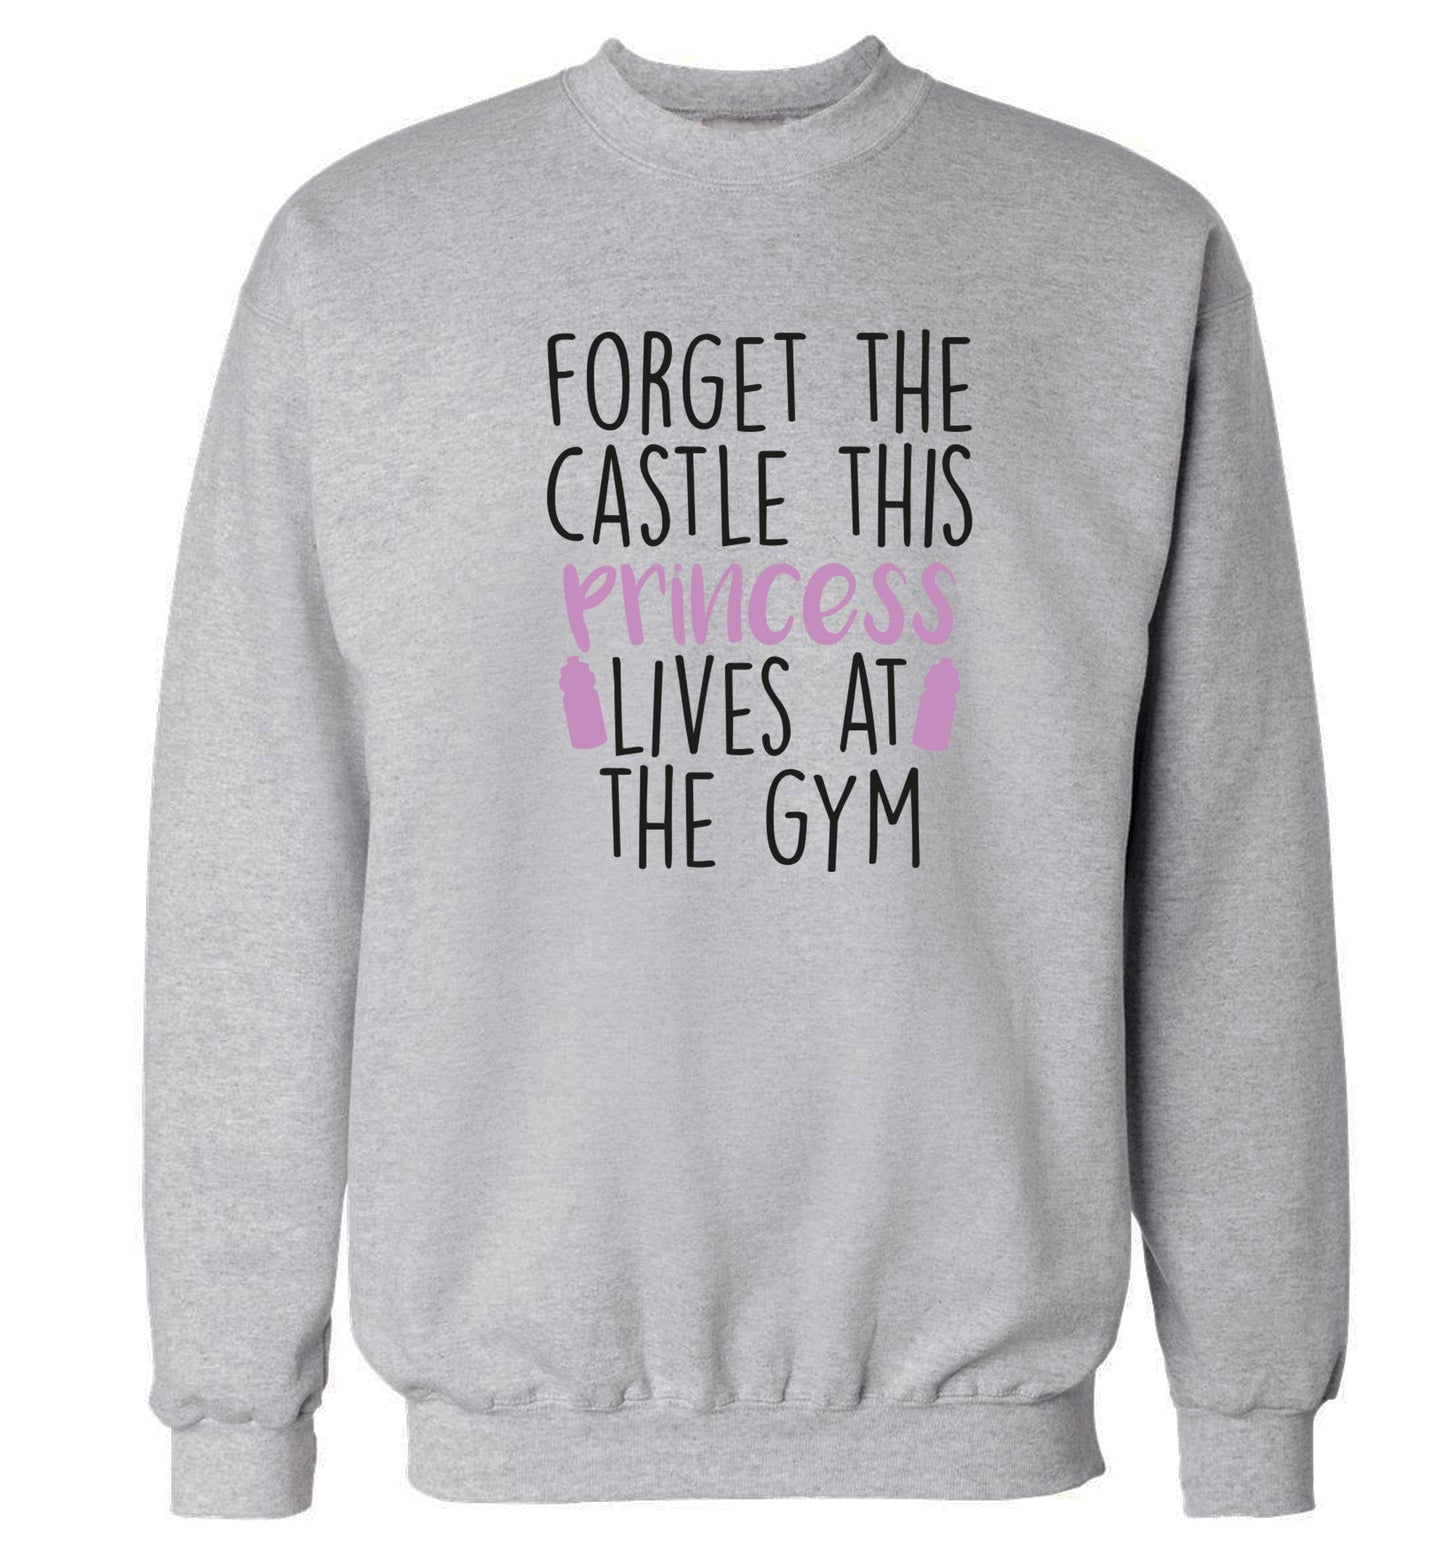 Forget the castle this princess lives at the gym Adult's unisex grey Sweater 2XL